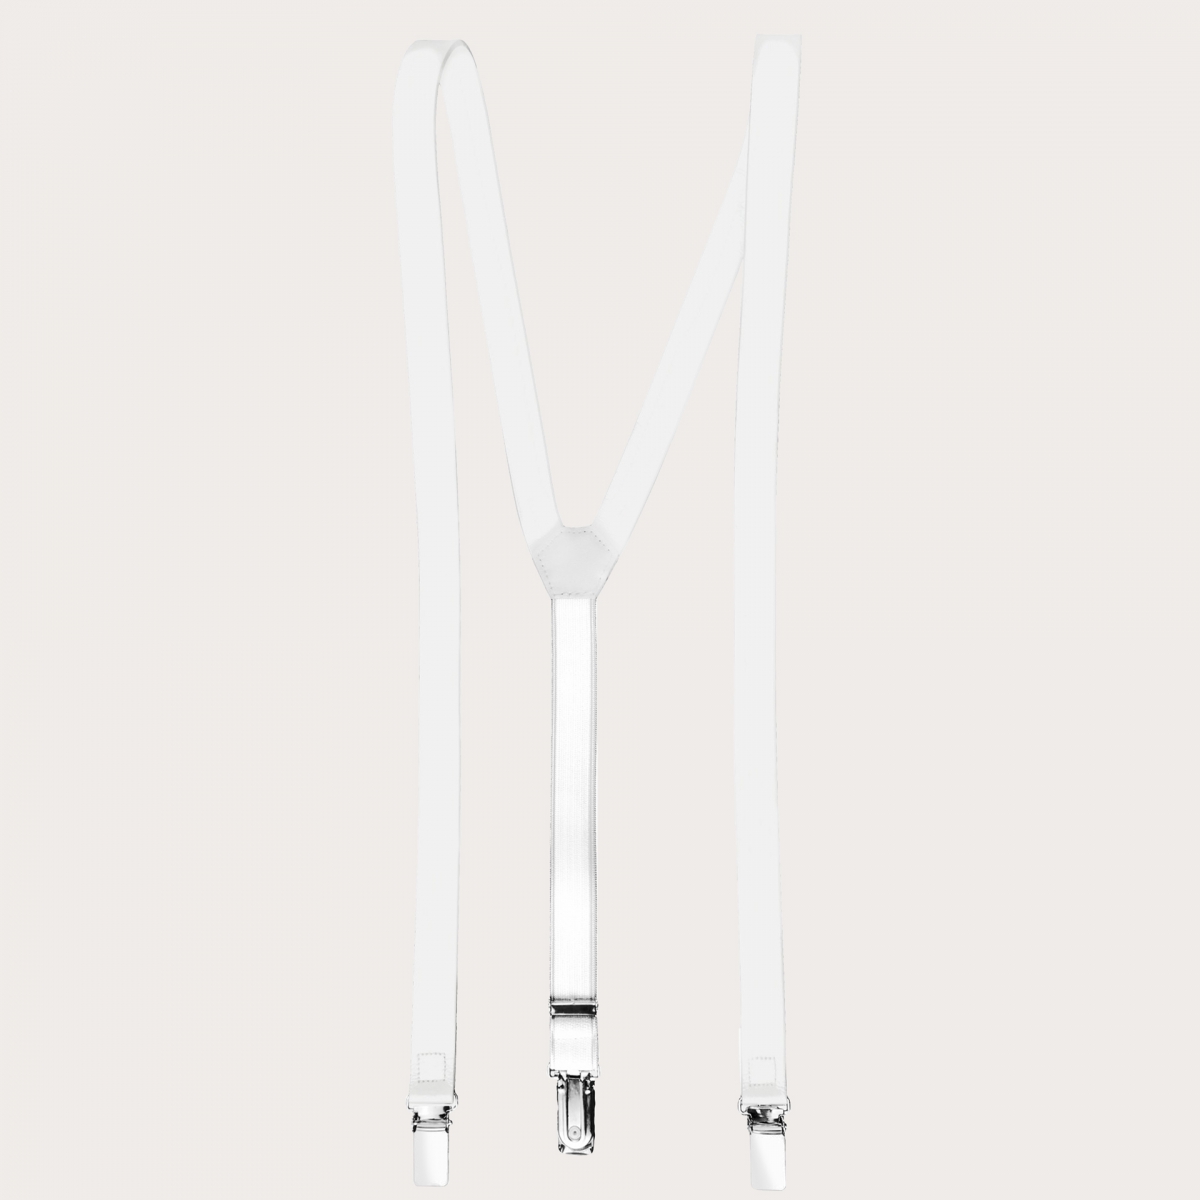 BRUCLE Y-shape leather suspenders, white